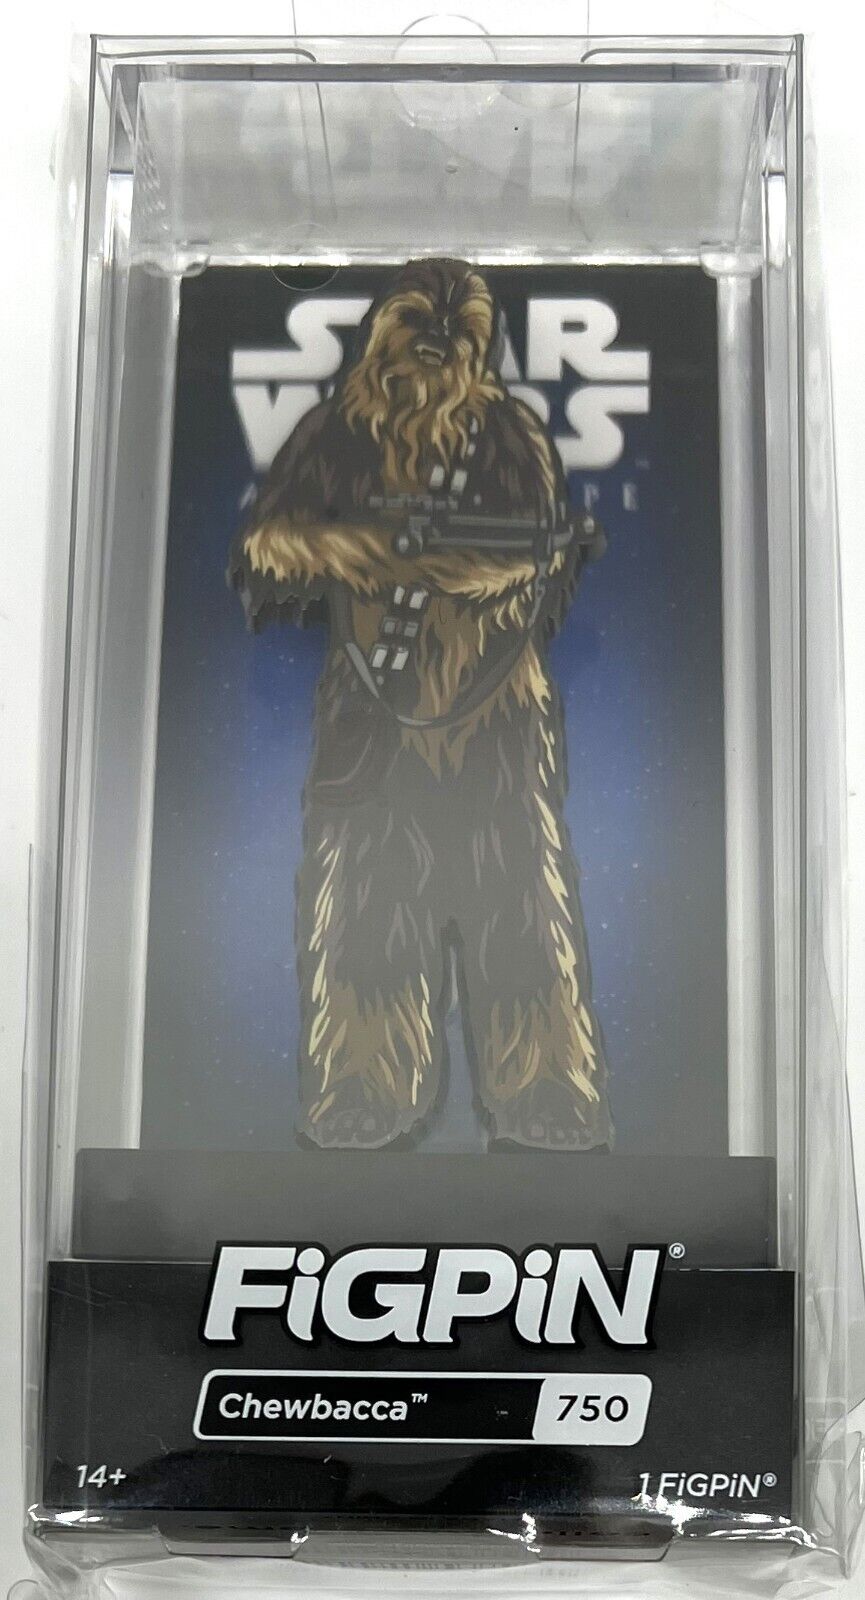 FiGPiN Star Wars A New Hope Chewbacca #750 Collectable Pin